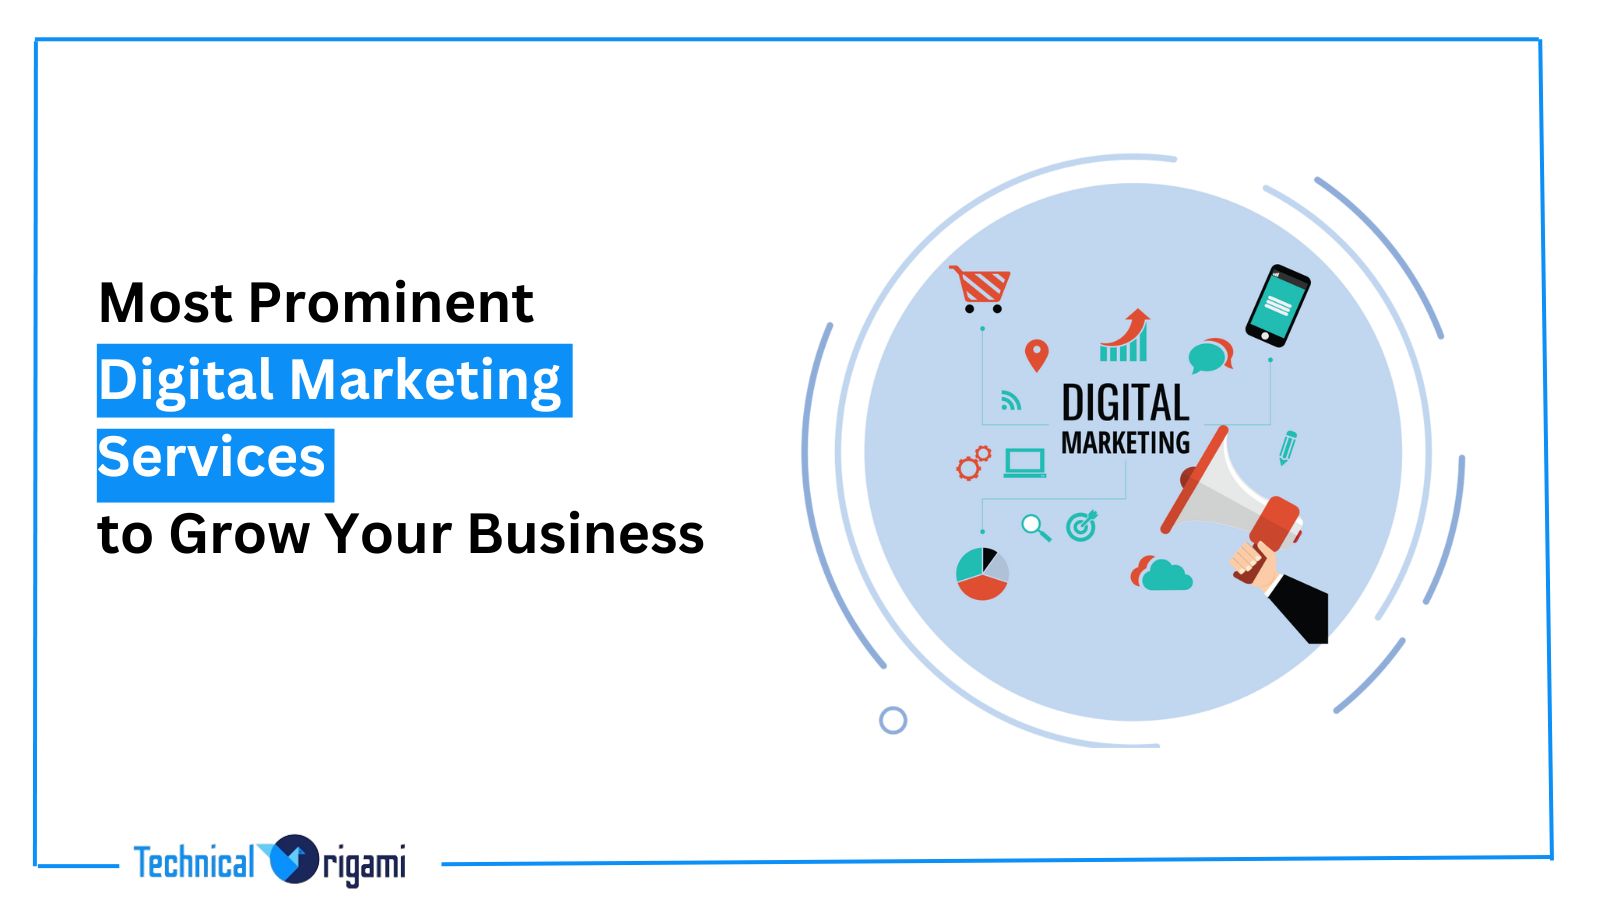 Most Prominent Digital Marketing Services to Grow Your Business